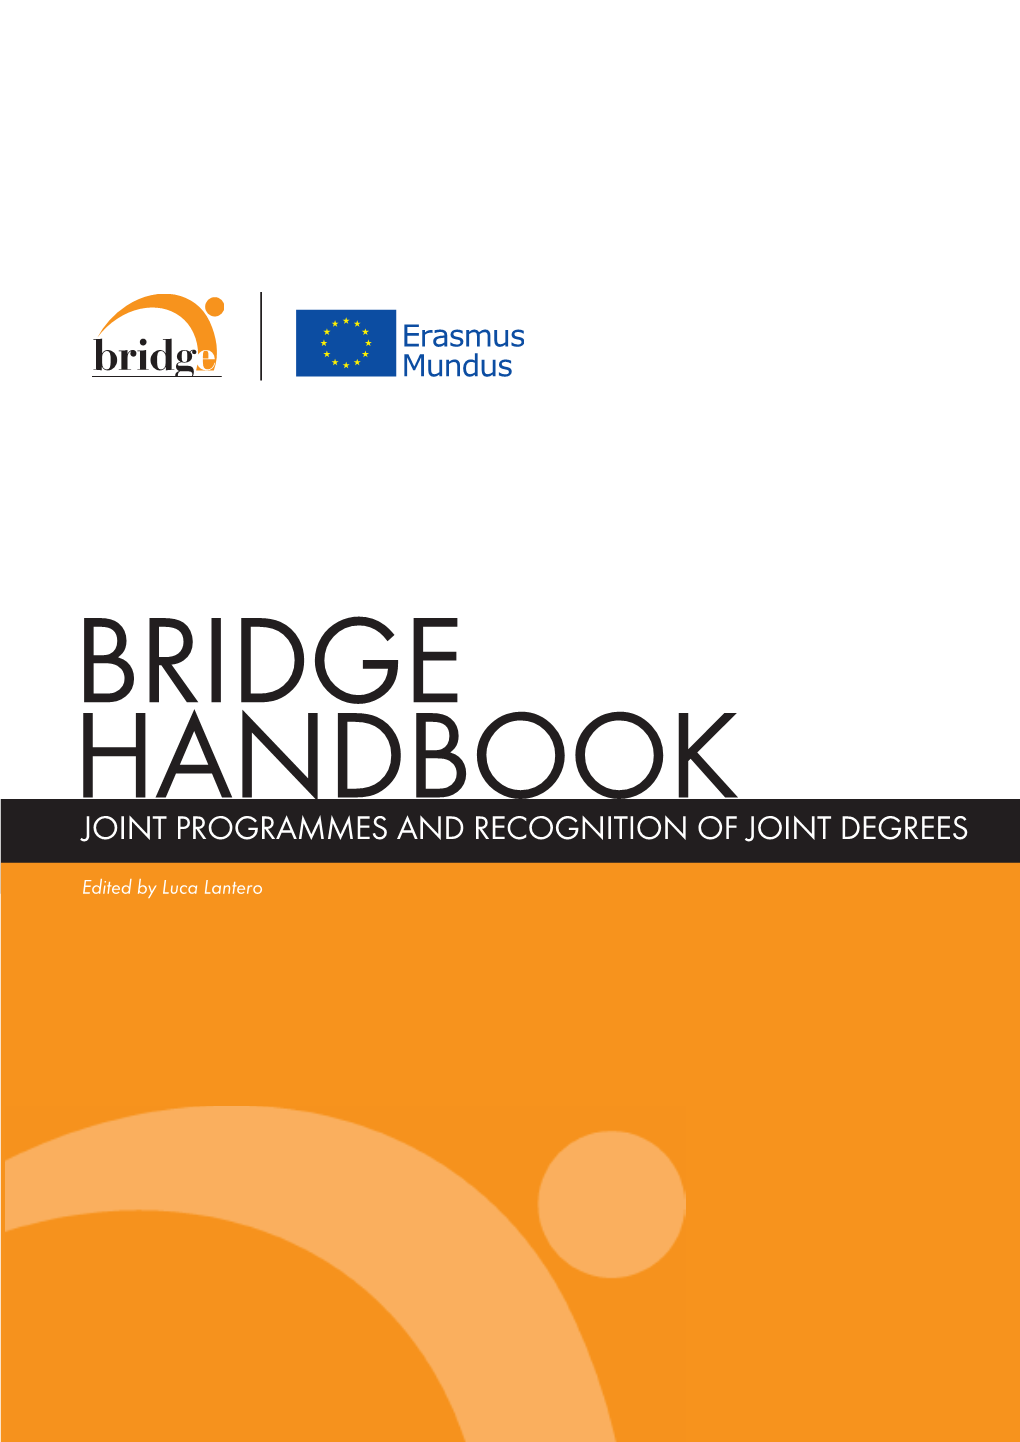 BRIDGE HANDBOOK Joint Programmes and Recognition of Joint Degrees